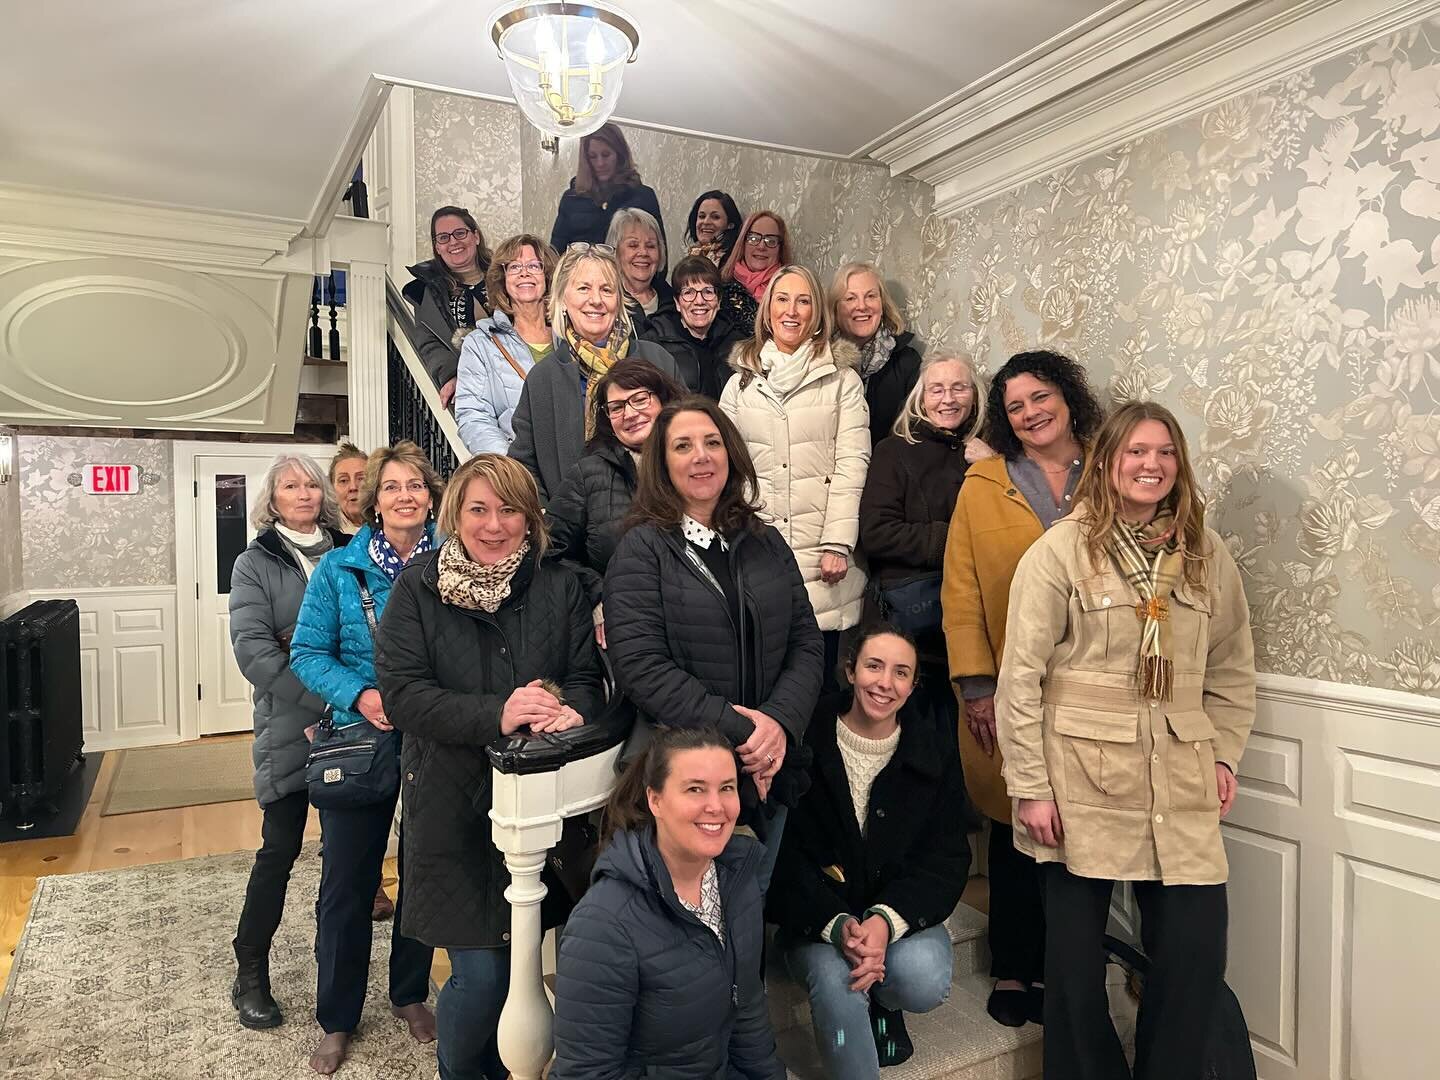 A night on the town! A big THANK YOU to the Davenport Inn and the Seacoast Rep for two amazing tours! The Davenport Inn was beyond stunning and the Rep was wildly fascinating! #davenportinn #seacoastrep #gfwc #gfwcnh #portsmouthnh